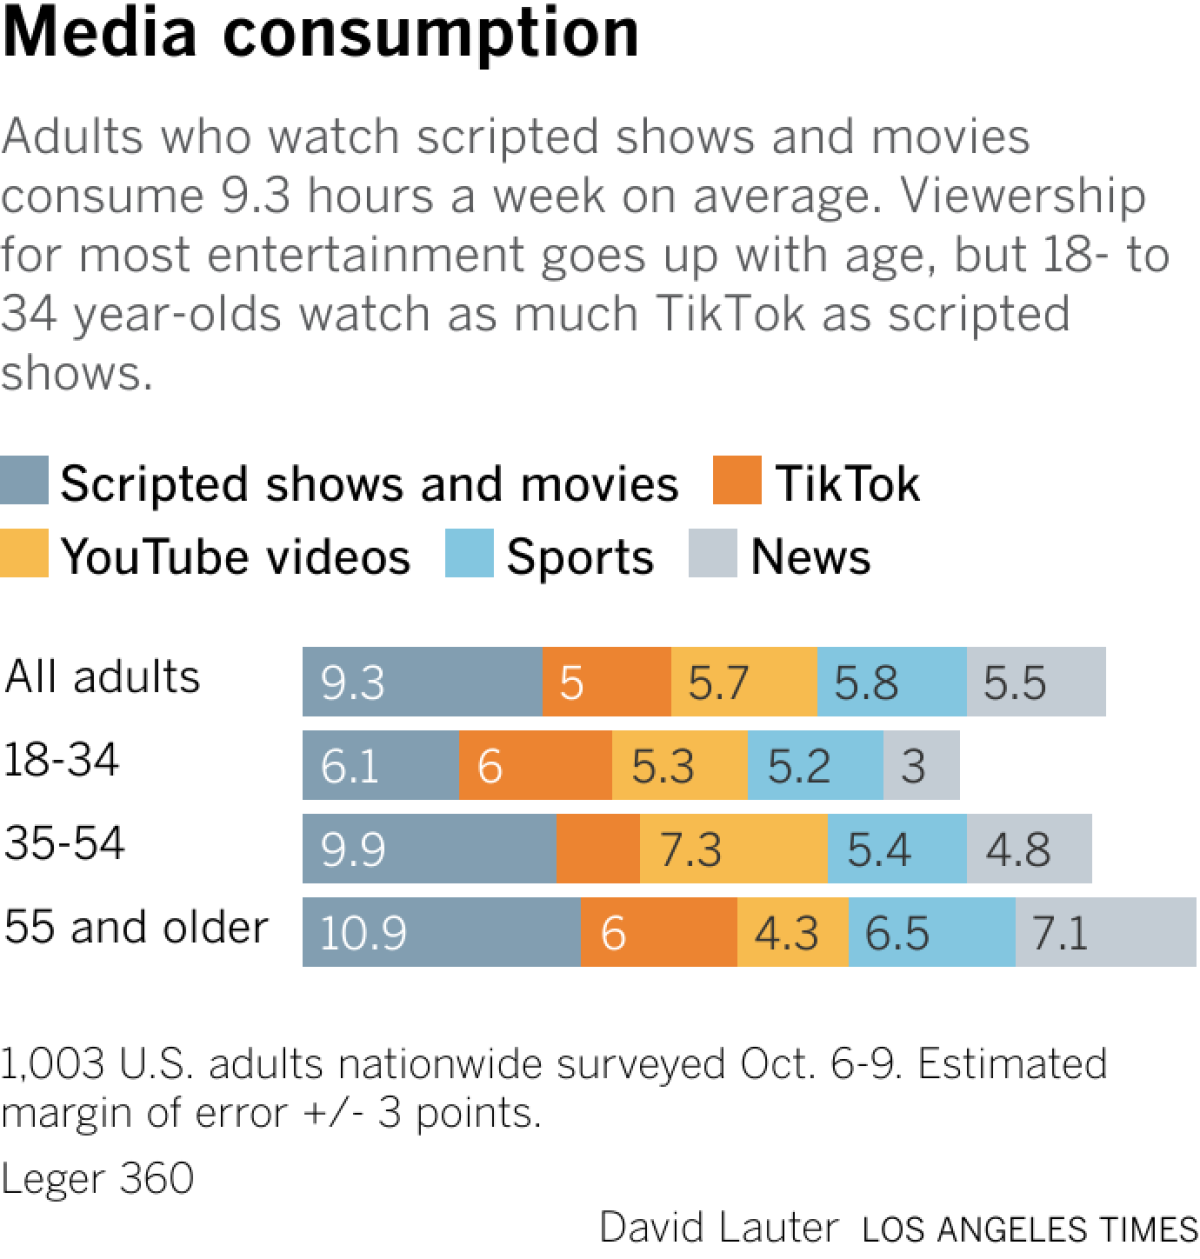 A stacked bar chart showing the number of hours adults watch scripted shows and movies, TikTok videos, YouTube videos, sports and news each week, broken down by different age groups.